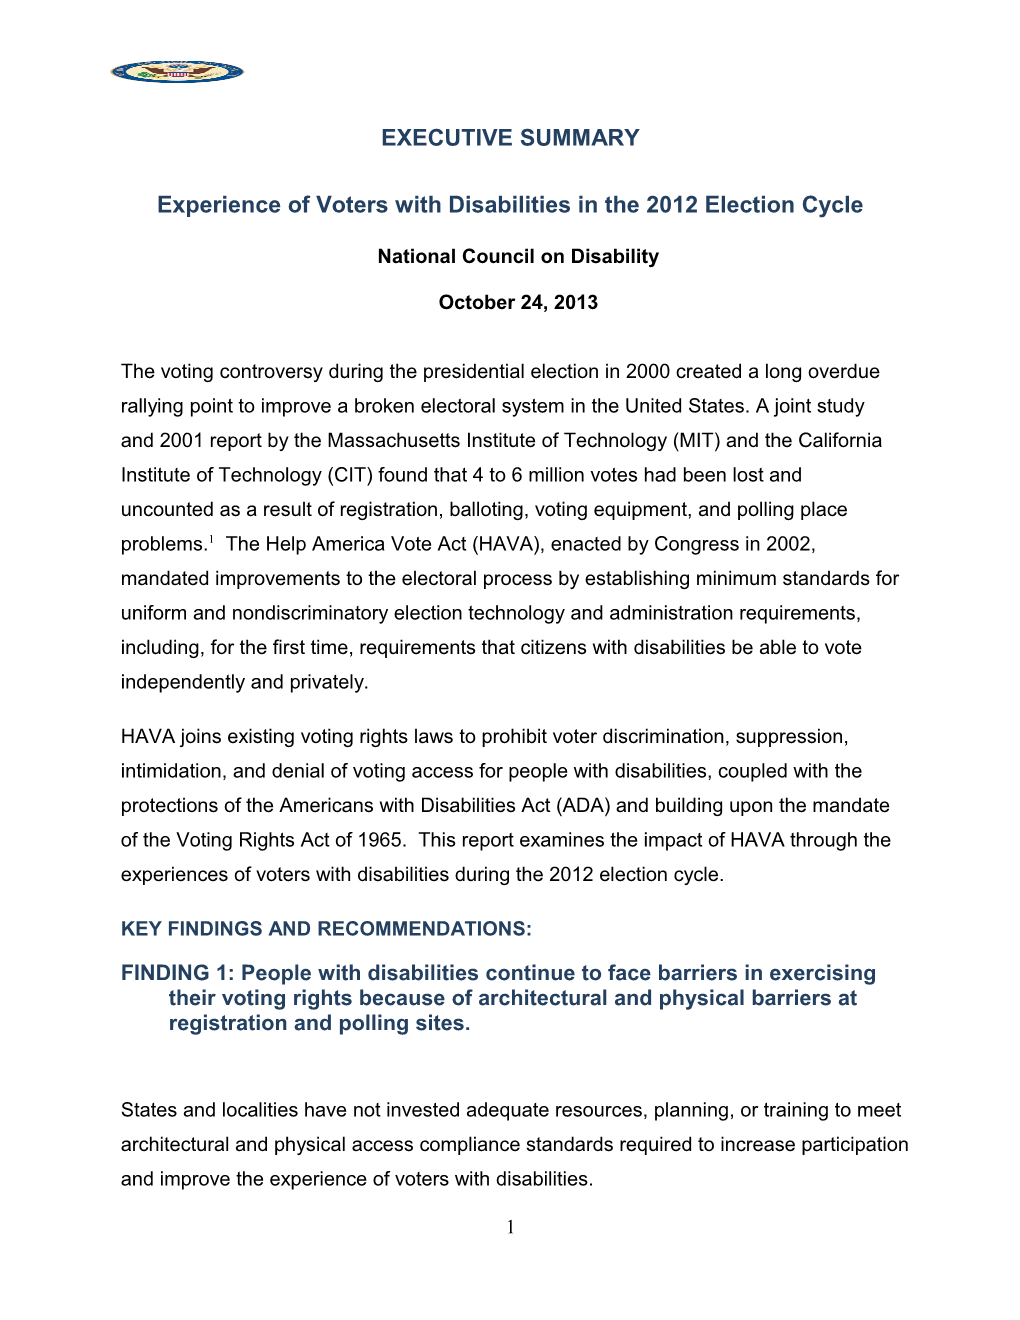 Experience of Voters with Disabilities in the 2012 Election Cycle